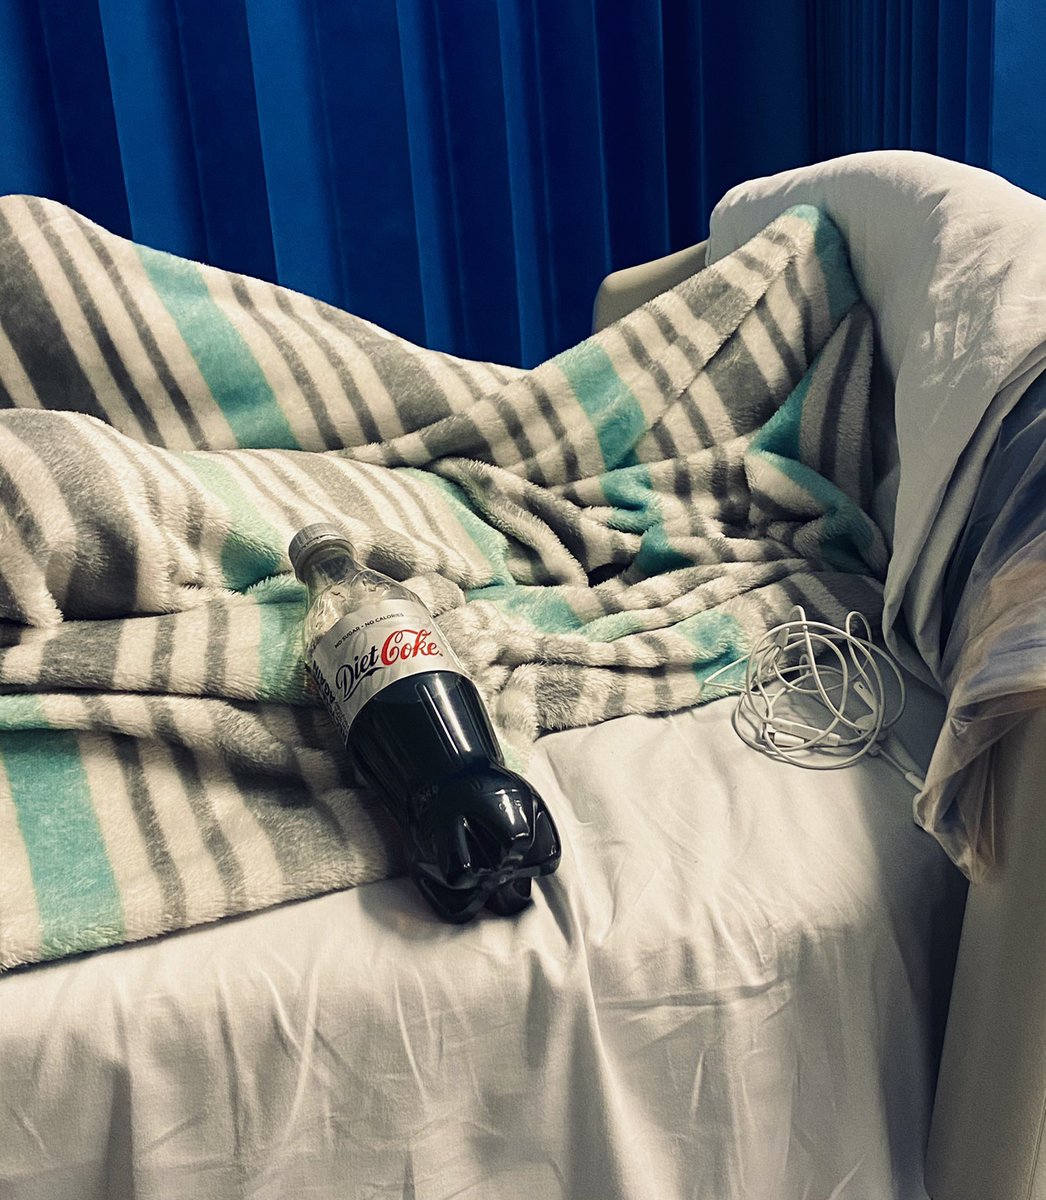 Today is sponsored by Diet Coke and Coffee. #sleepdeprivedmother #hospitalstay #femoralarteryrepair #roadtorecovery #rehabtime